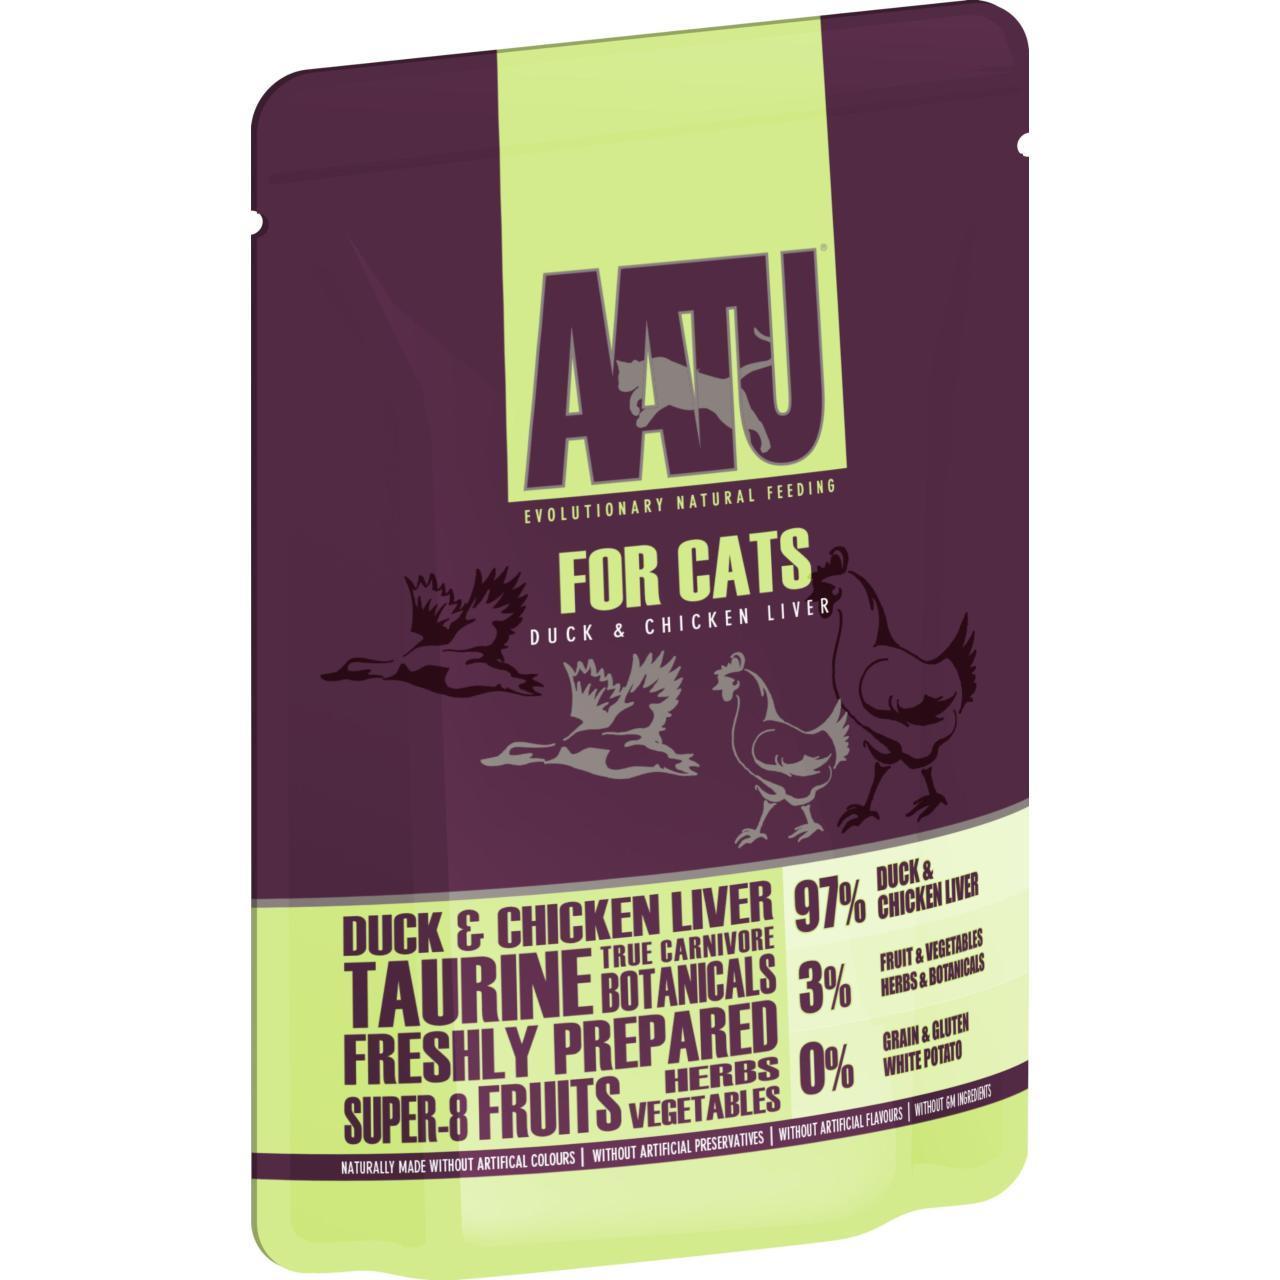 An image of AATU For Cats Duck & Chicken Liver Pouches